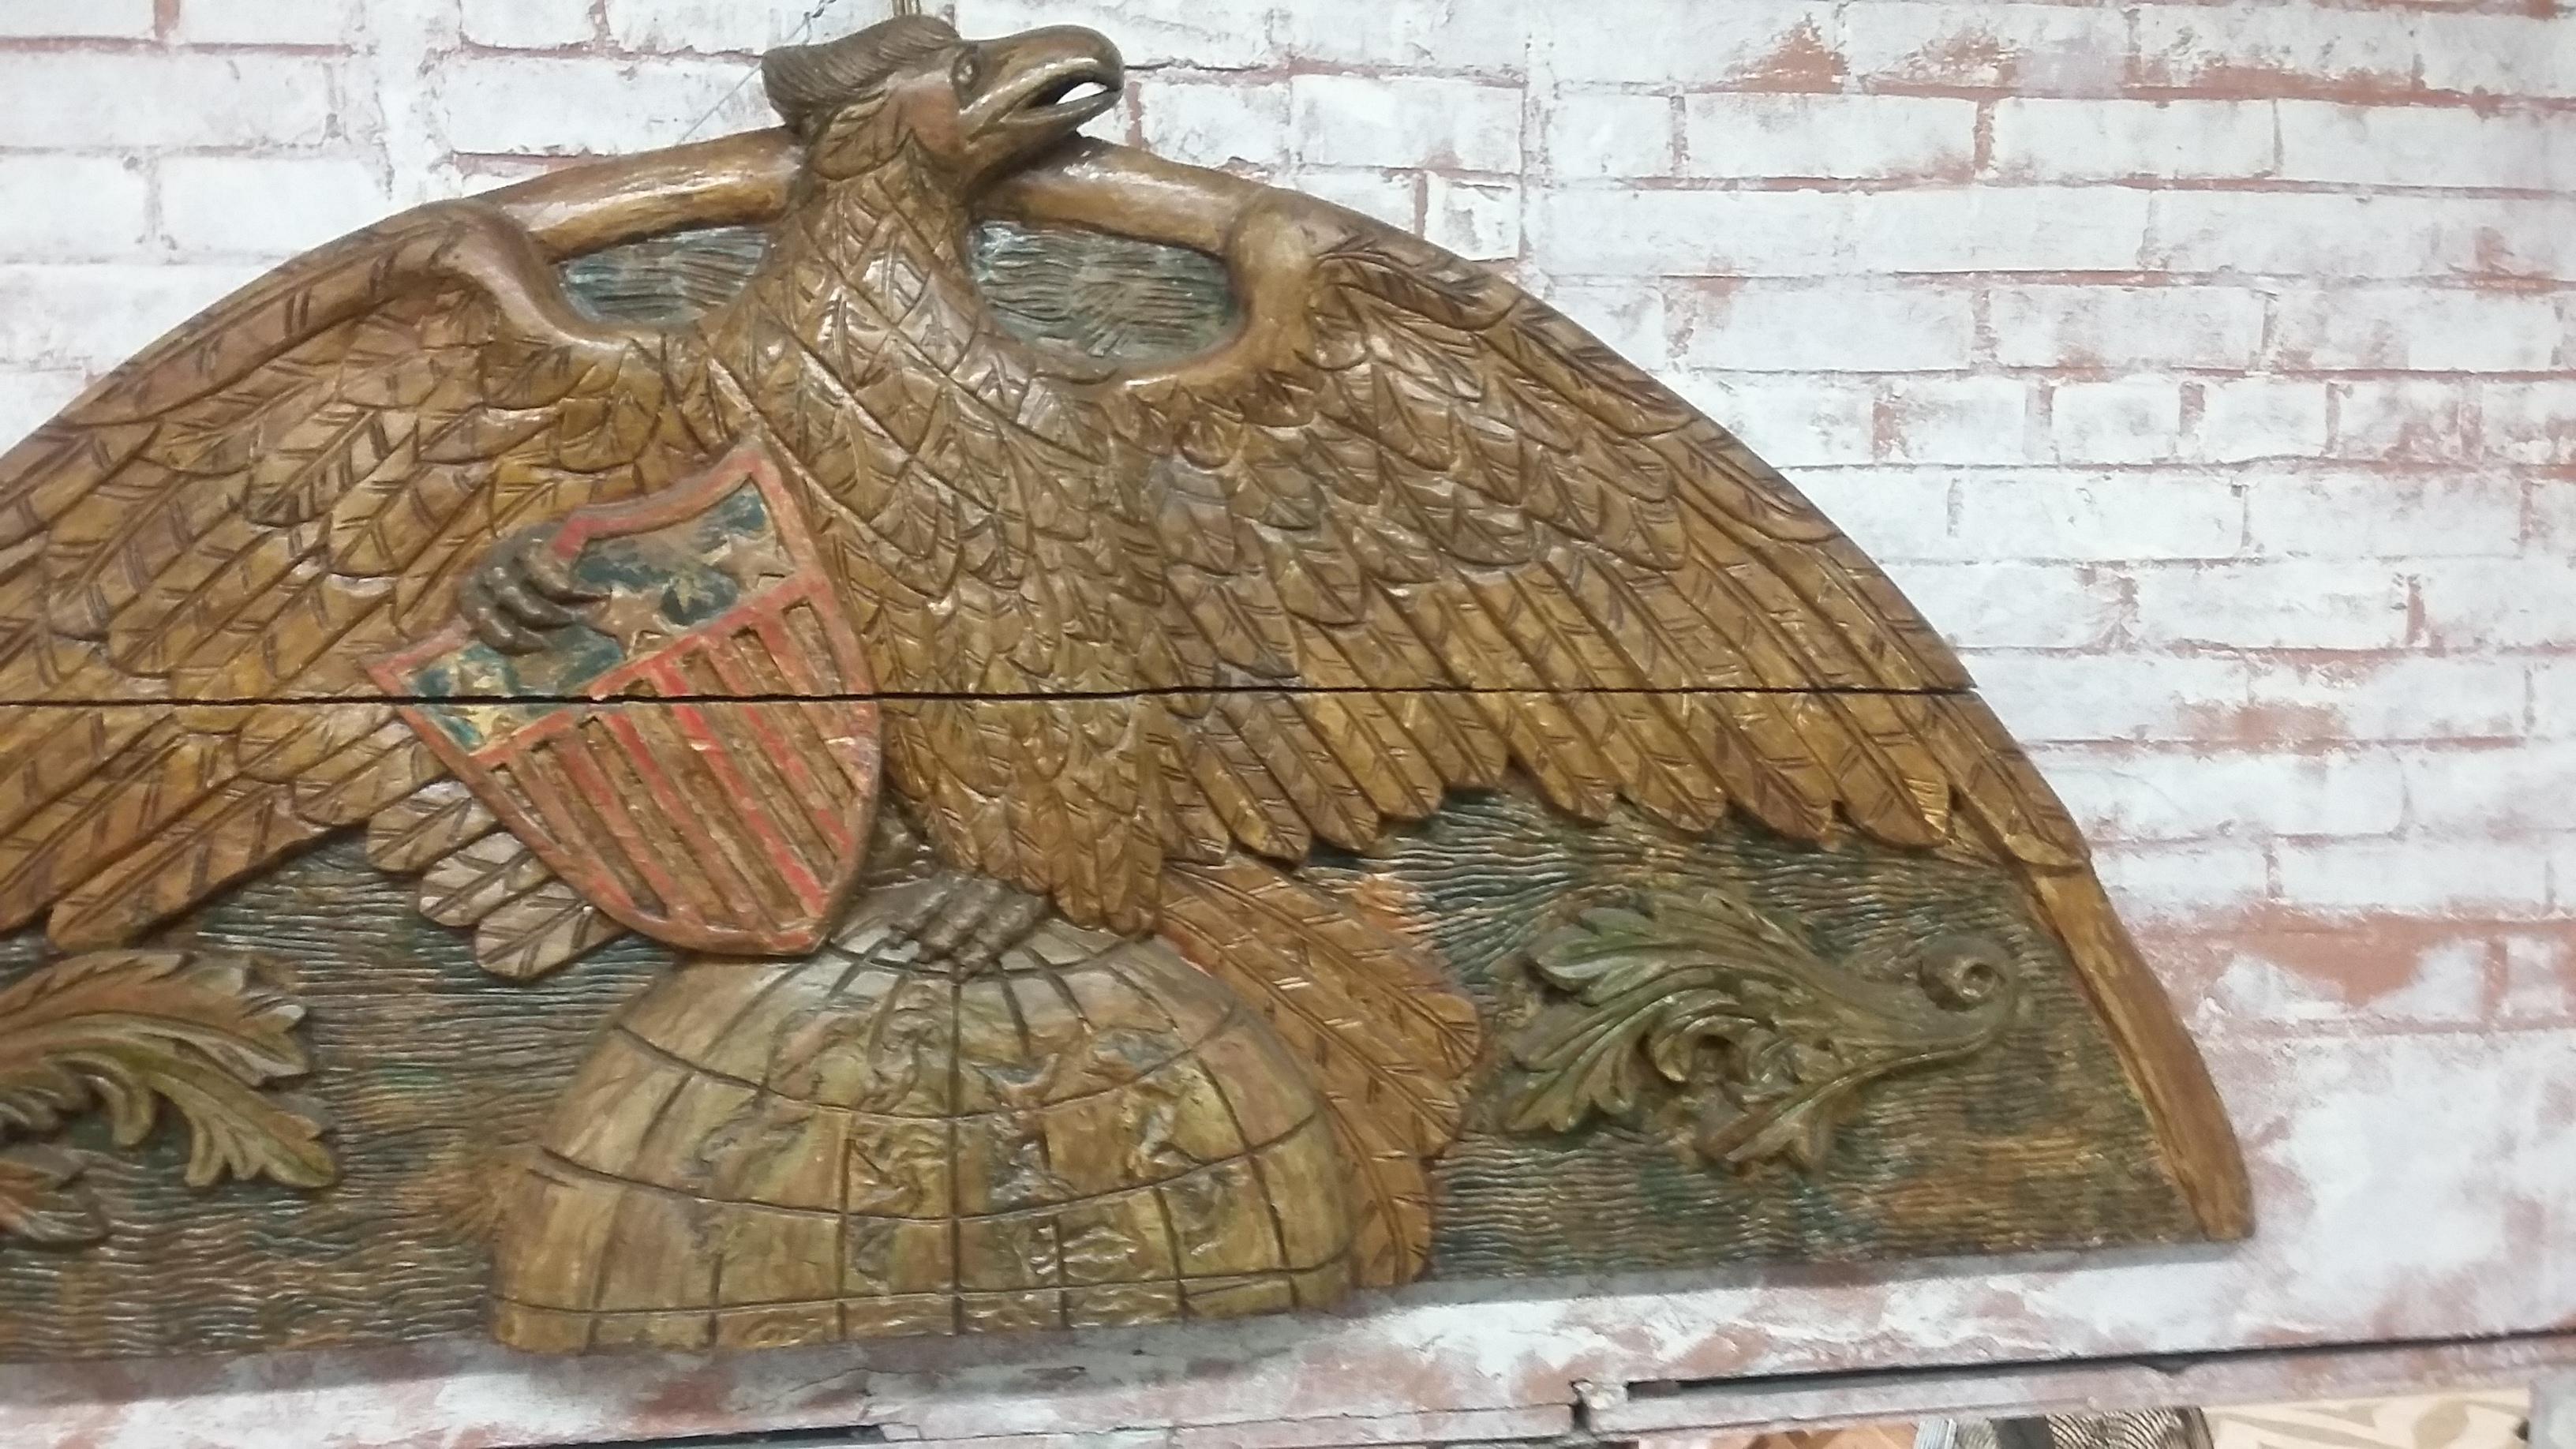 20th Century Vintage Carved American Eagle Sitting atop World Plague 